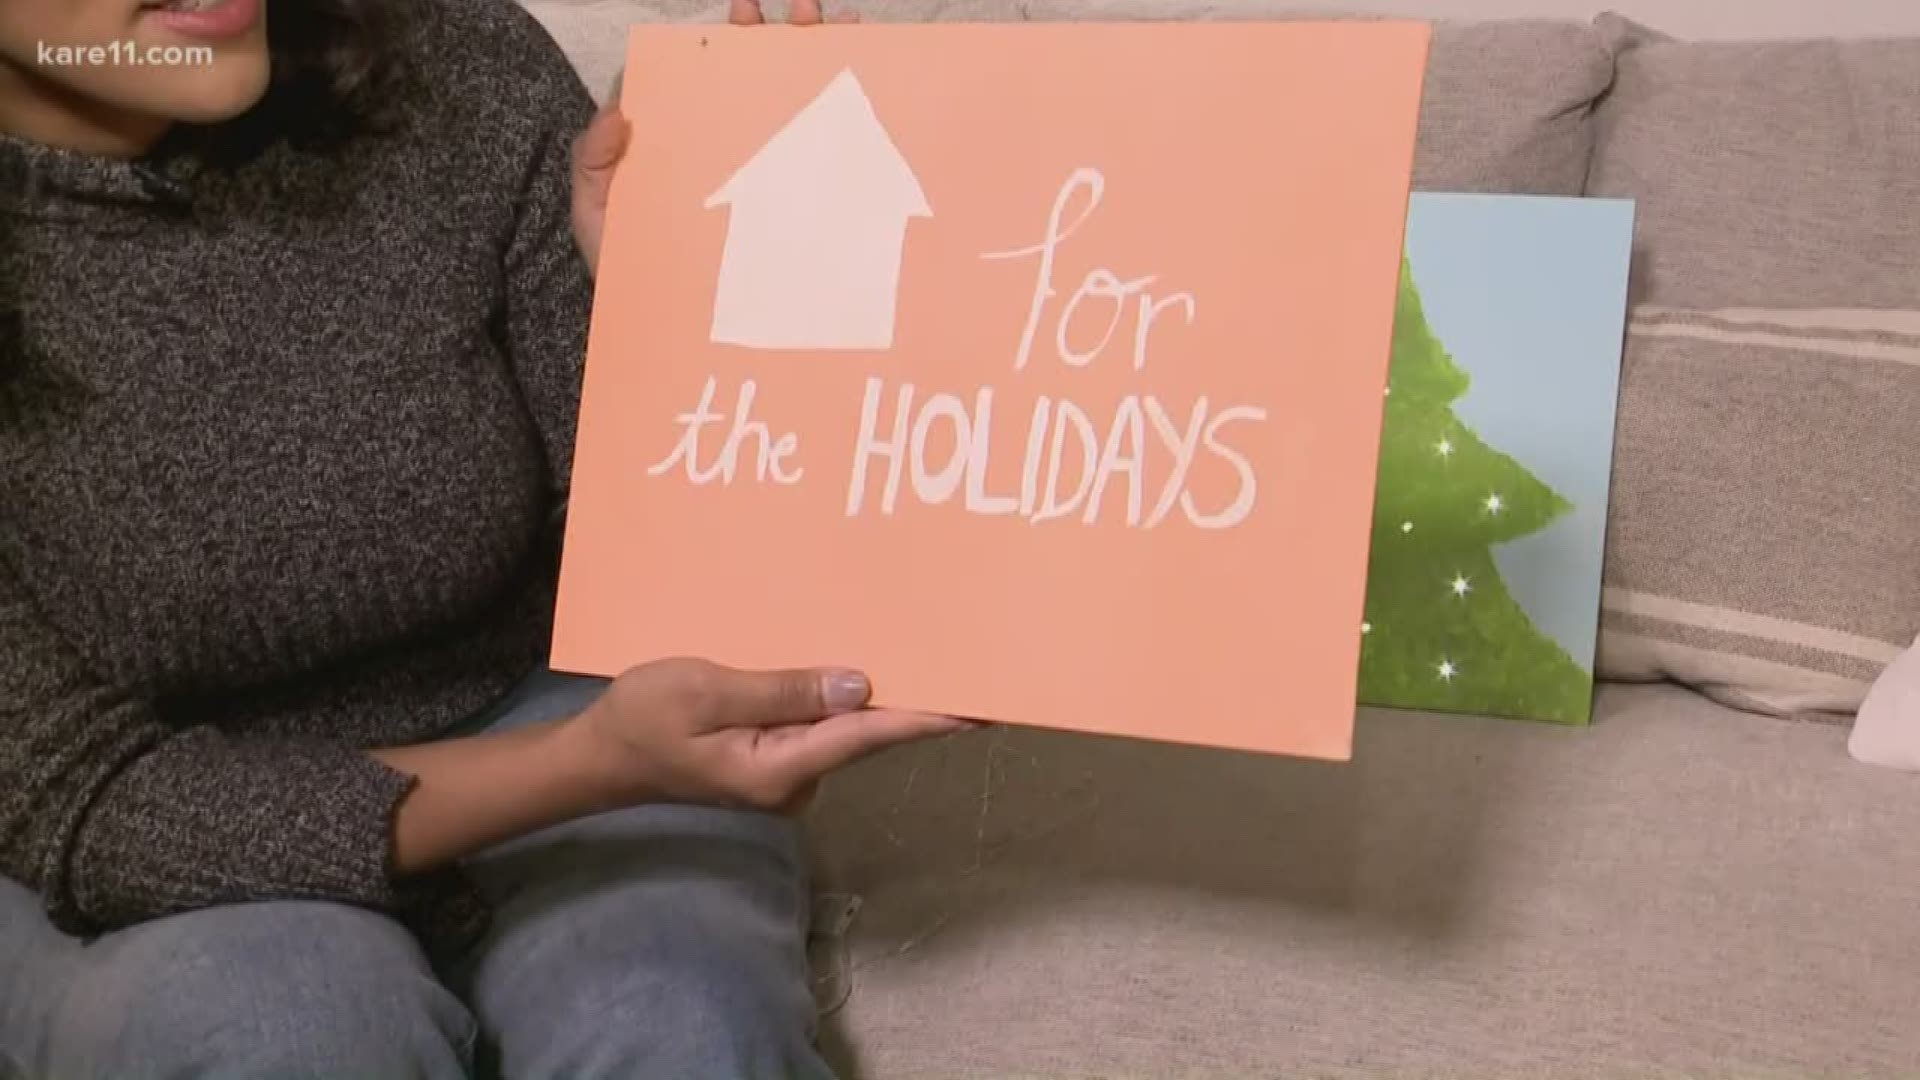 Kiya shows us how a simple string of lights can become a beautiful holiday accent piece.